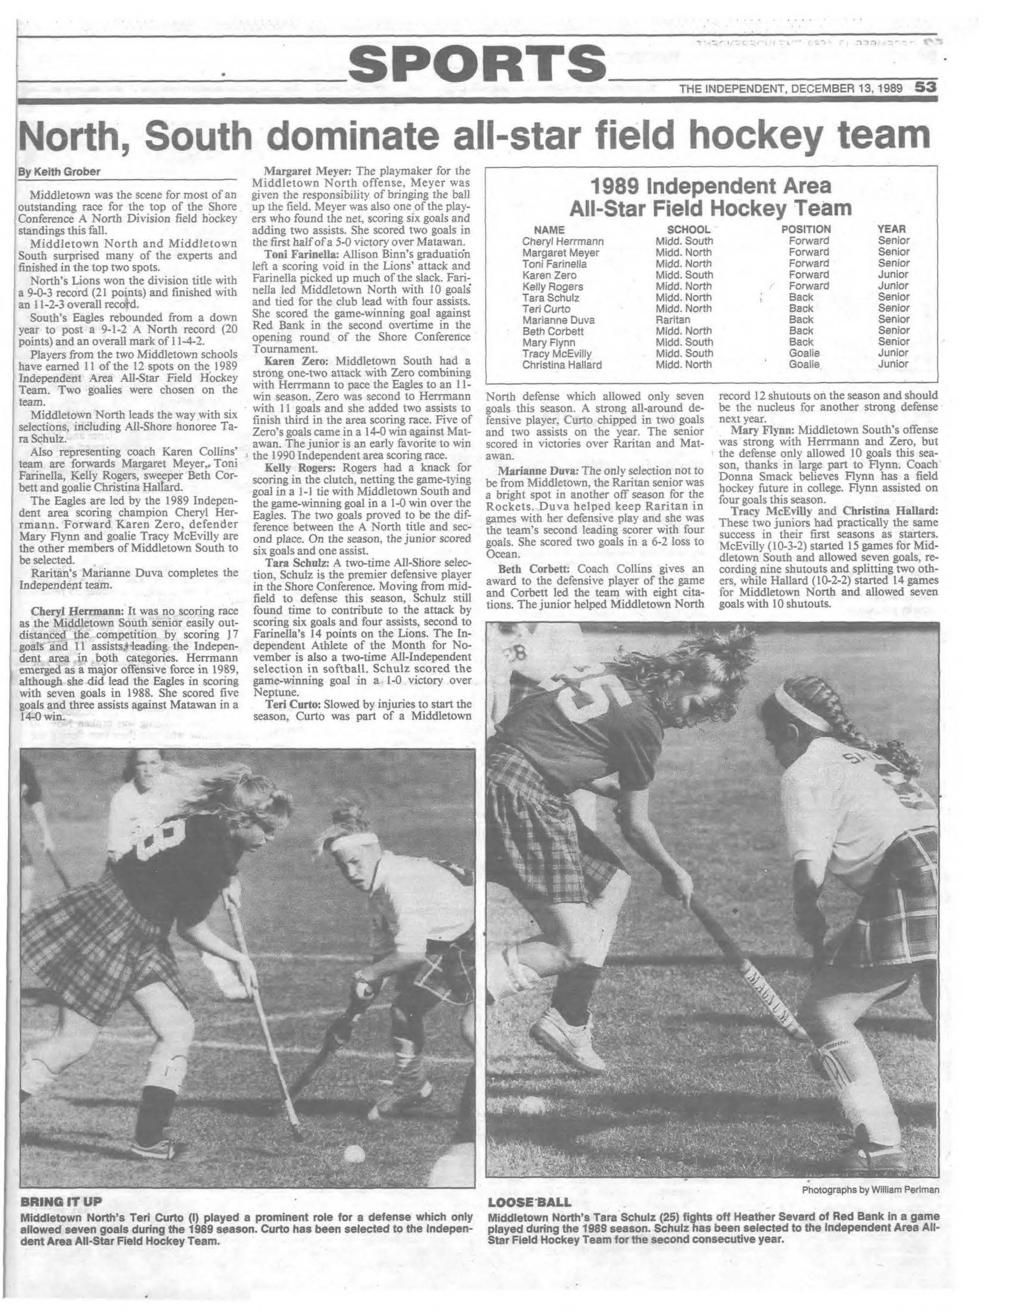 THE INDEPENDENT, DECEM BER 13, 1989 5 3 North, South dominate all-star field hockey team By Keith Grober M a r g a r e t M e y e r : T h e p l a y m a k e r f o r t h e M i d d l e t o w n N o r t h